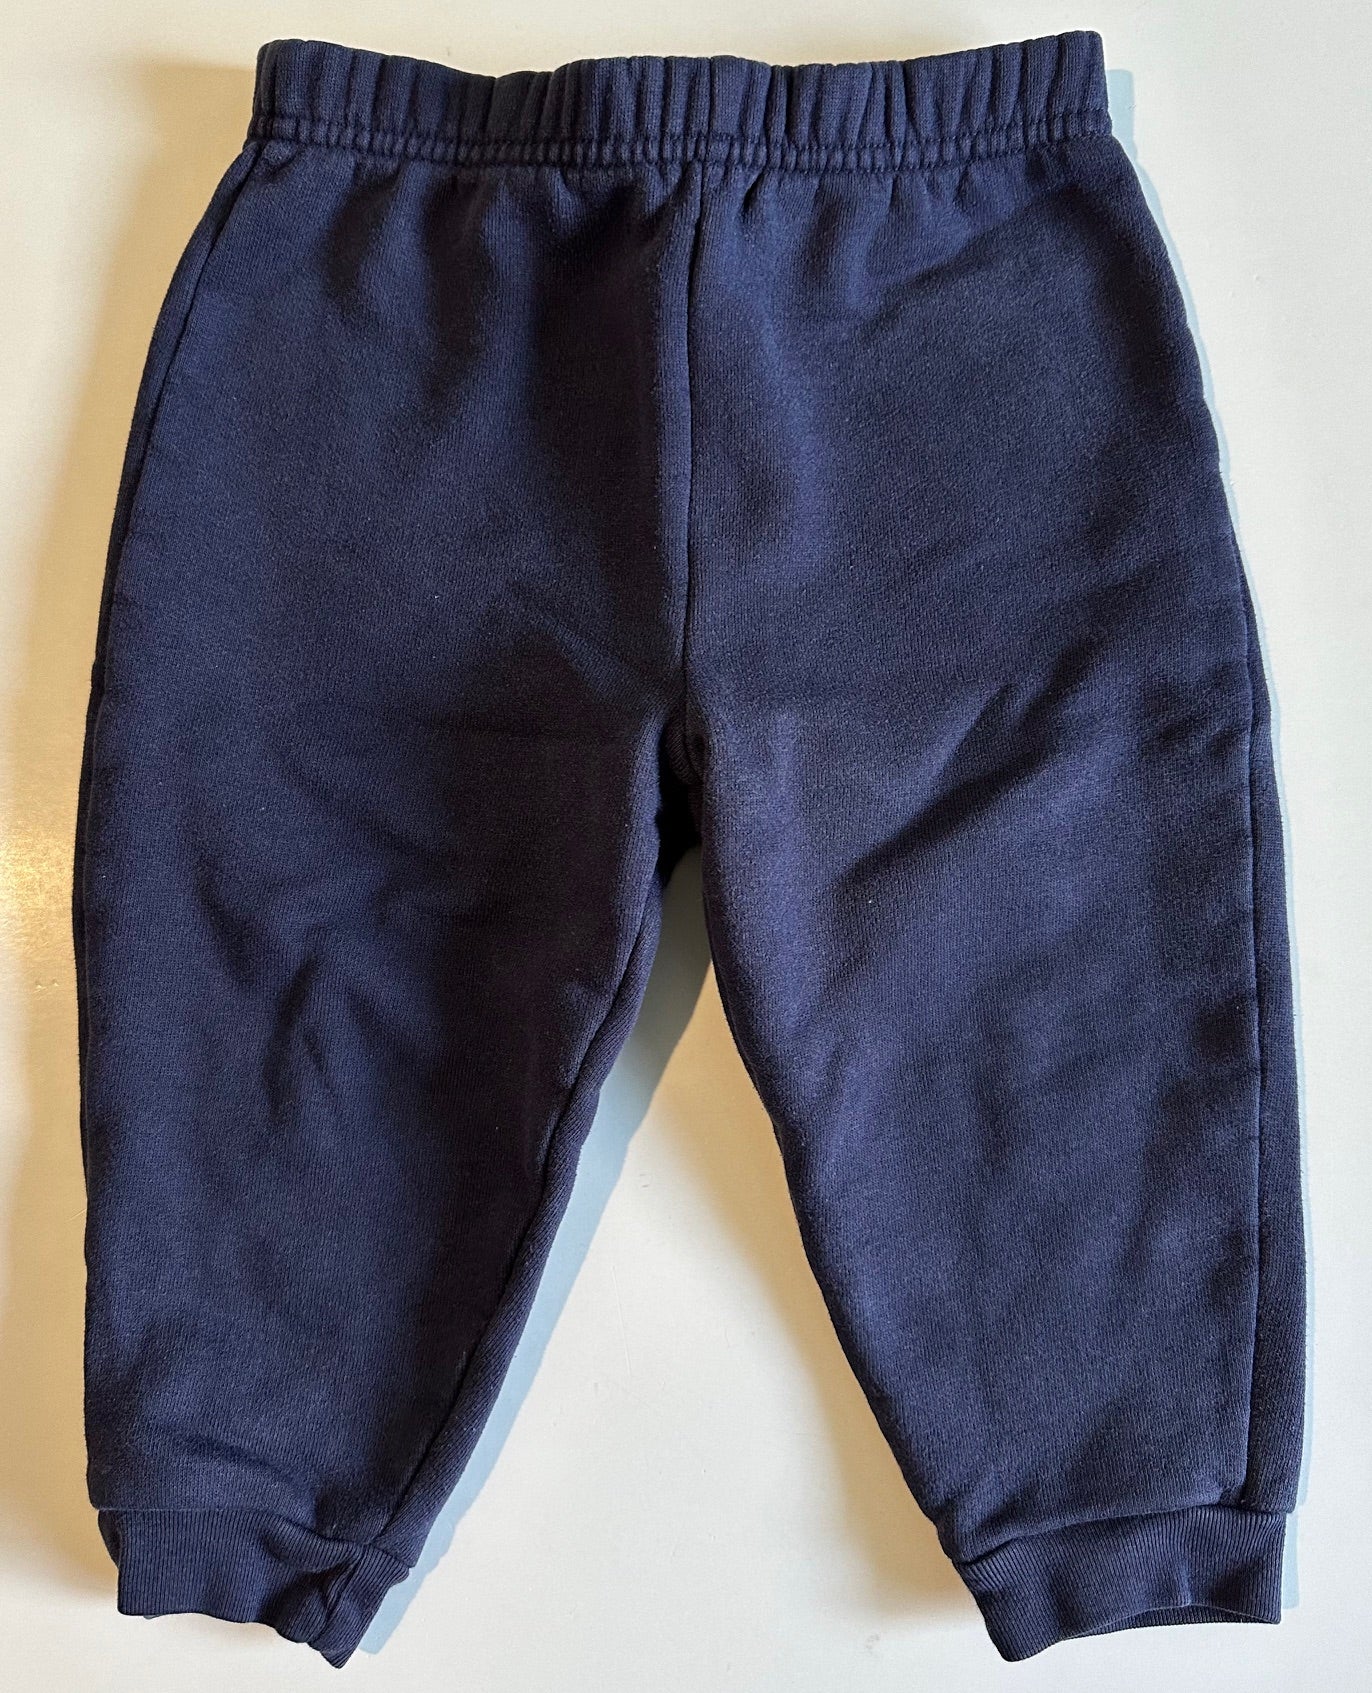 Unknown Brand, Navy Blue Sweatpants - 24 Months – Linen for Littles